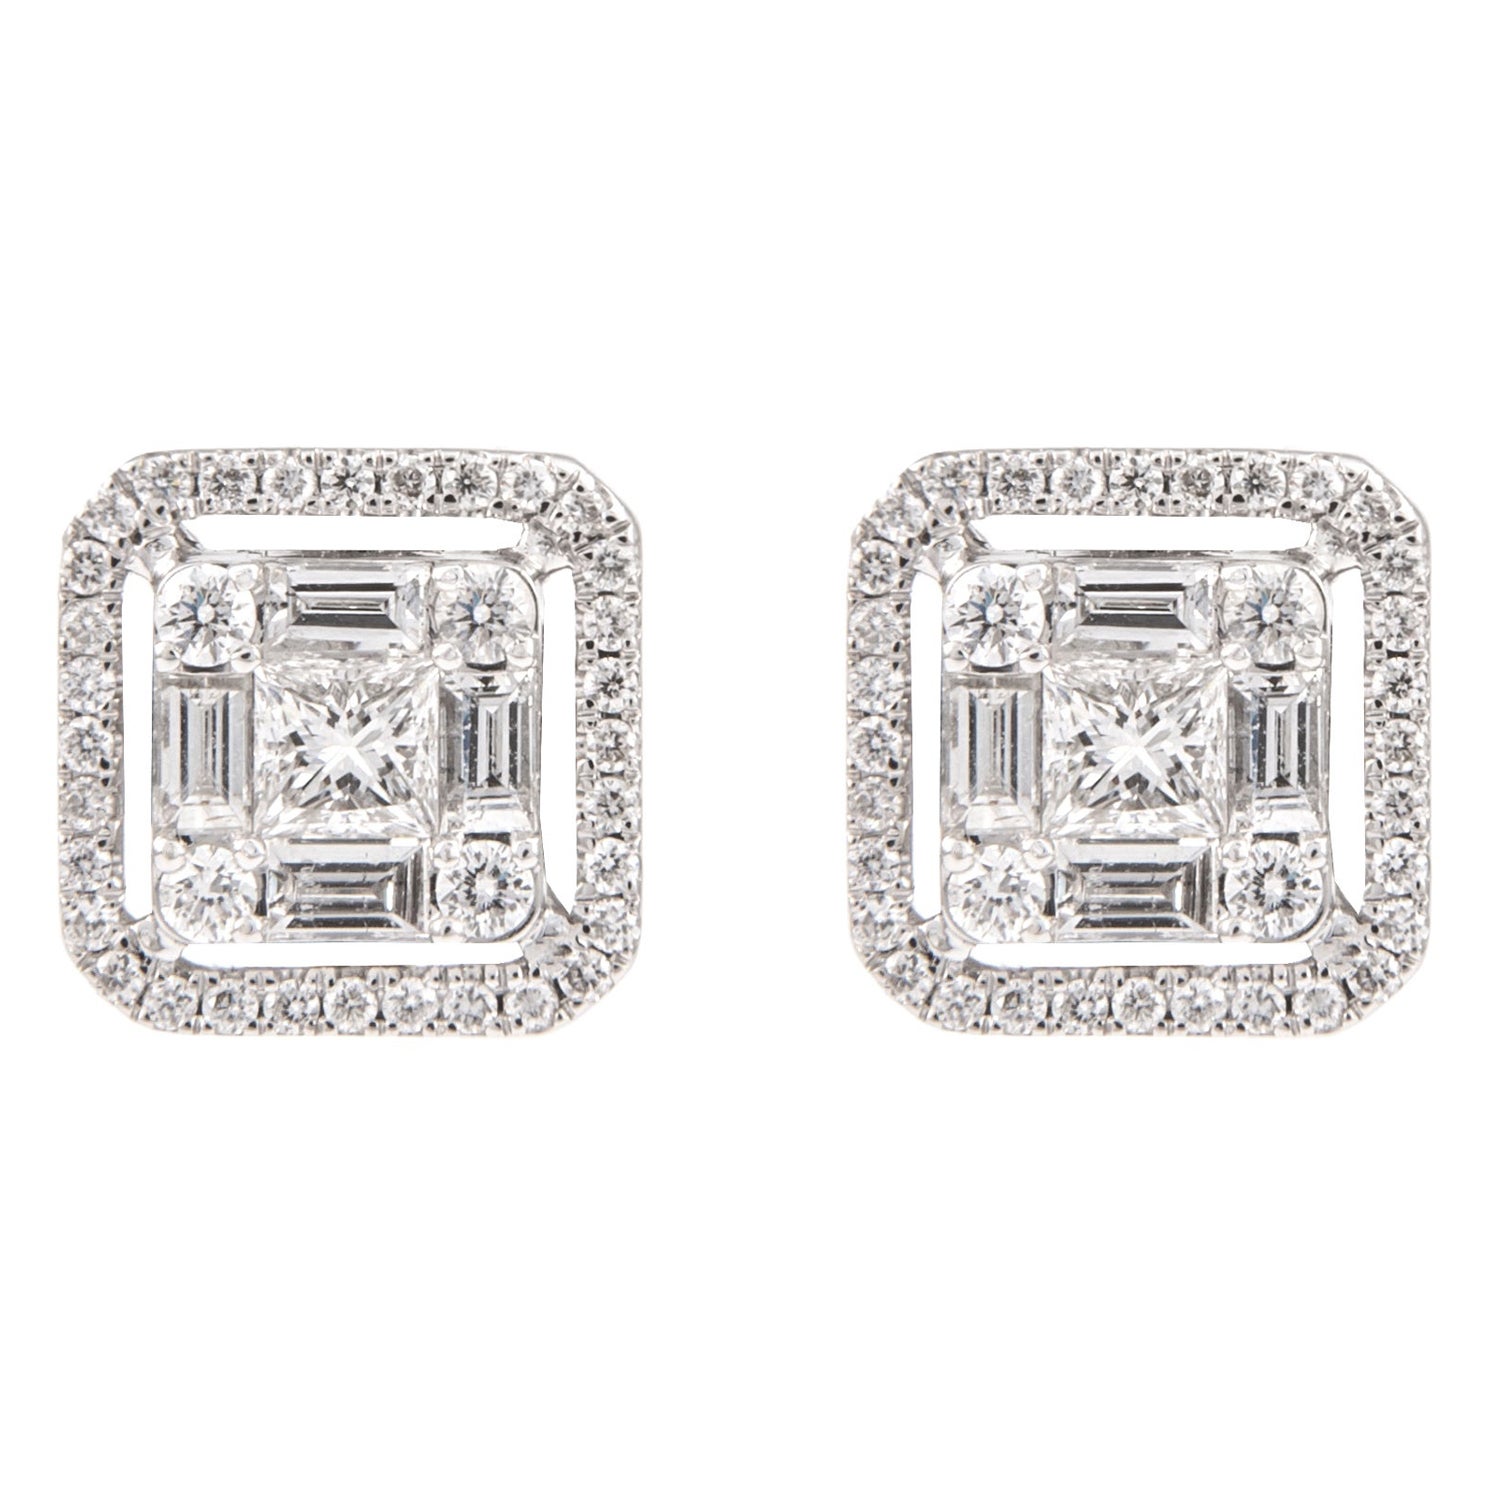 Alexander 1.29ct Illusion Set Diamond Stud Earrings with Halo 18k White Gold For Sale